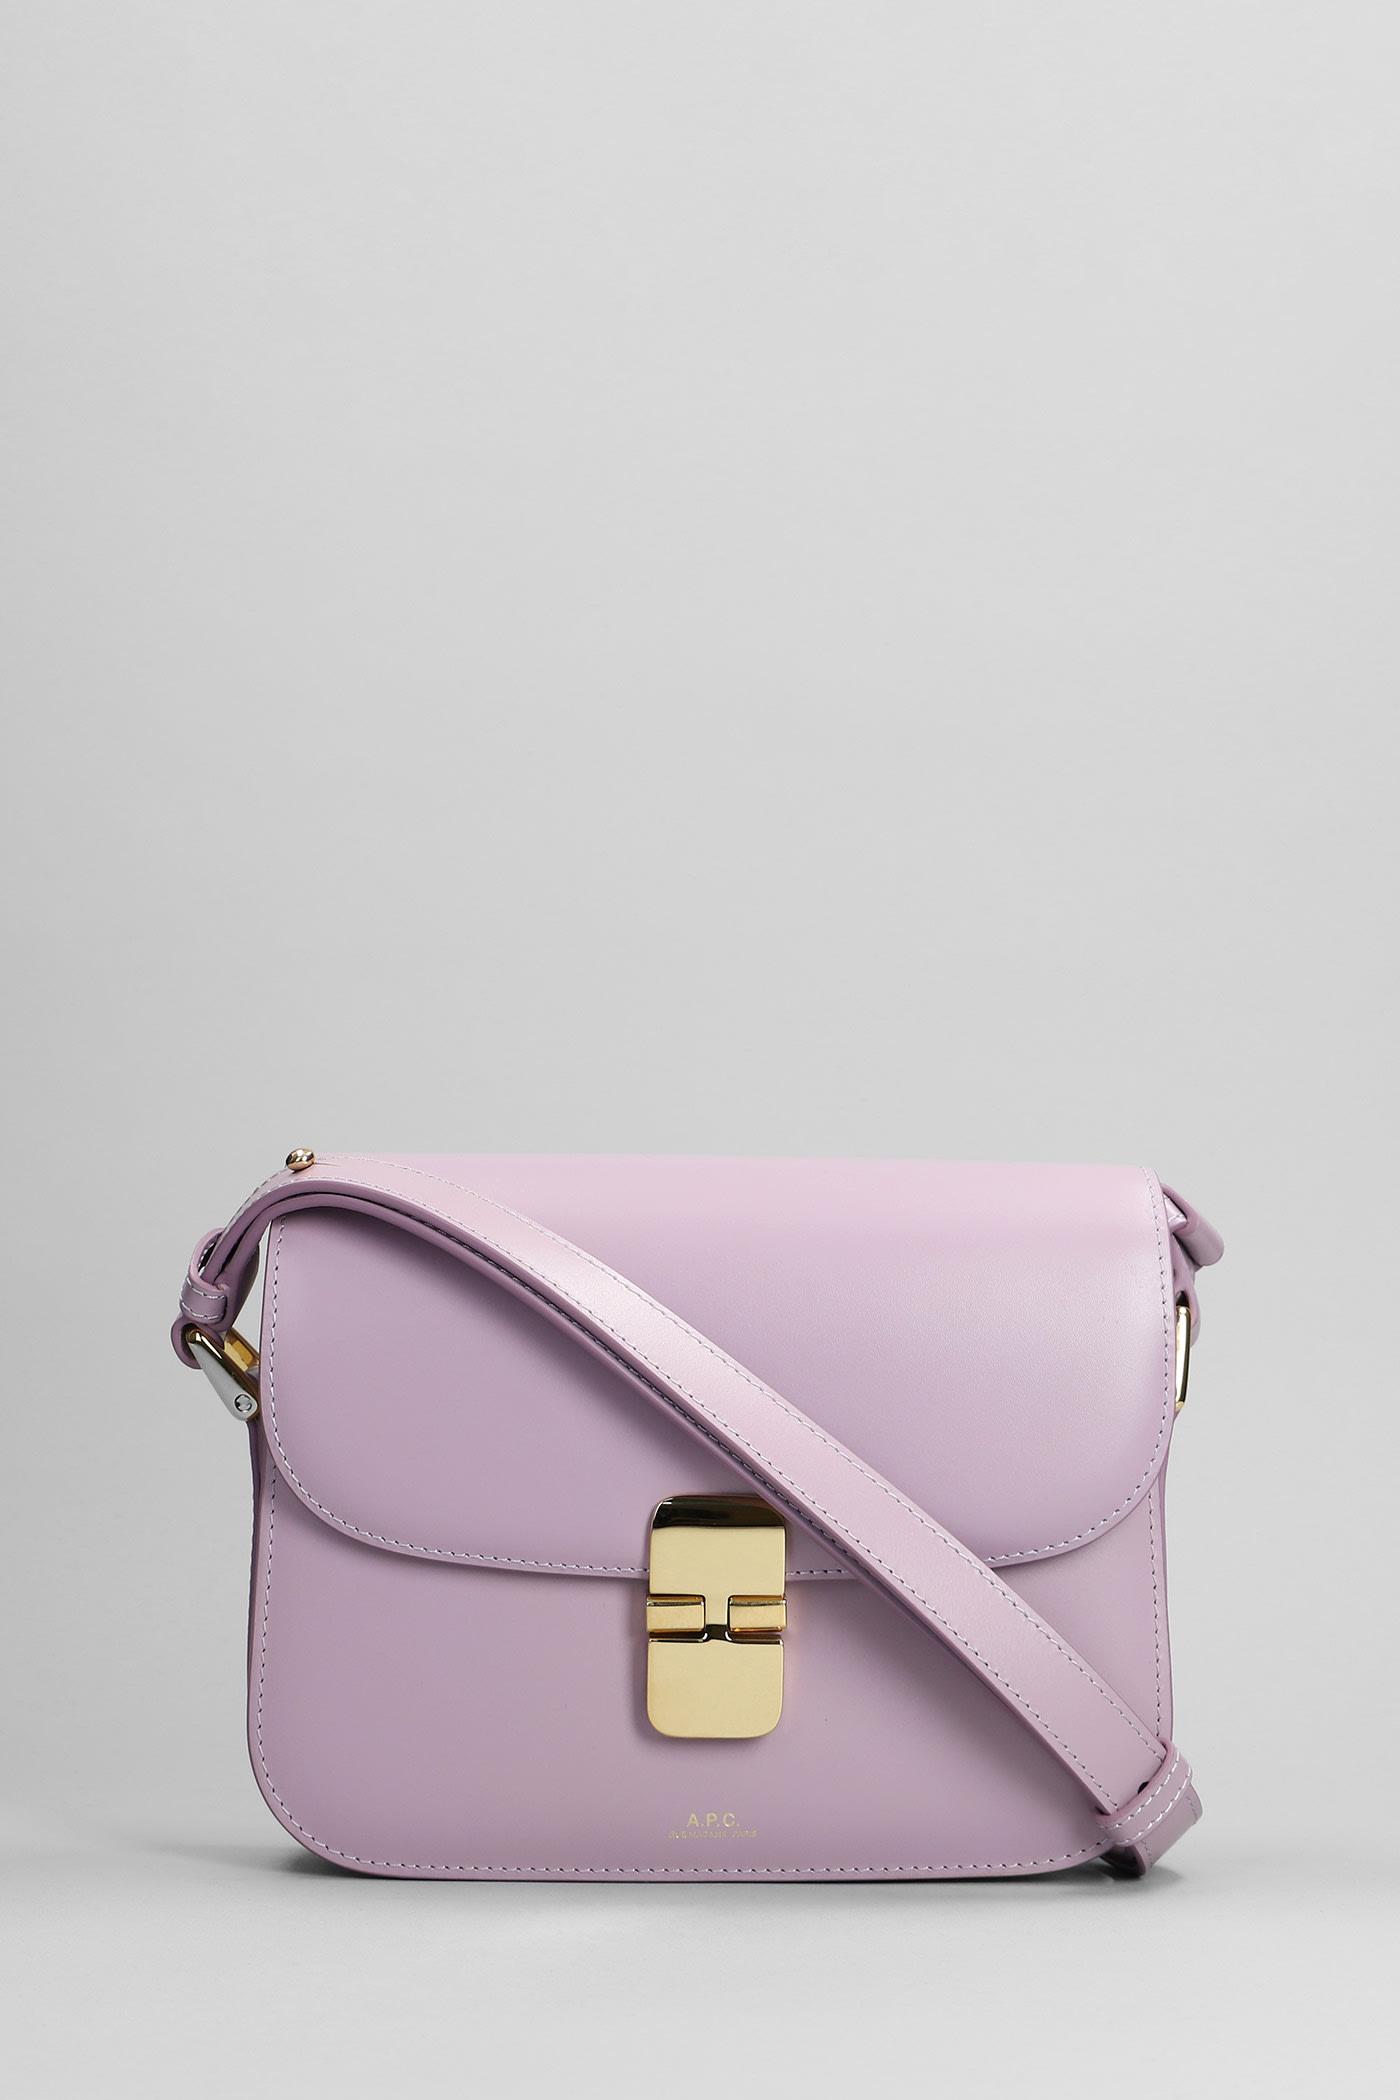 A.P.C. Grace Small Shoulder Bag In Lilla Leather